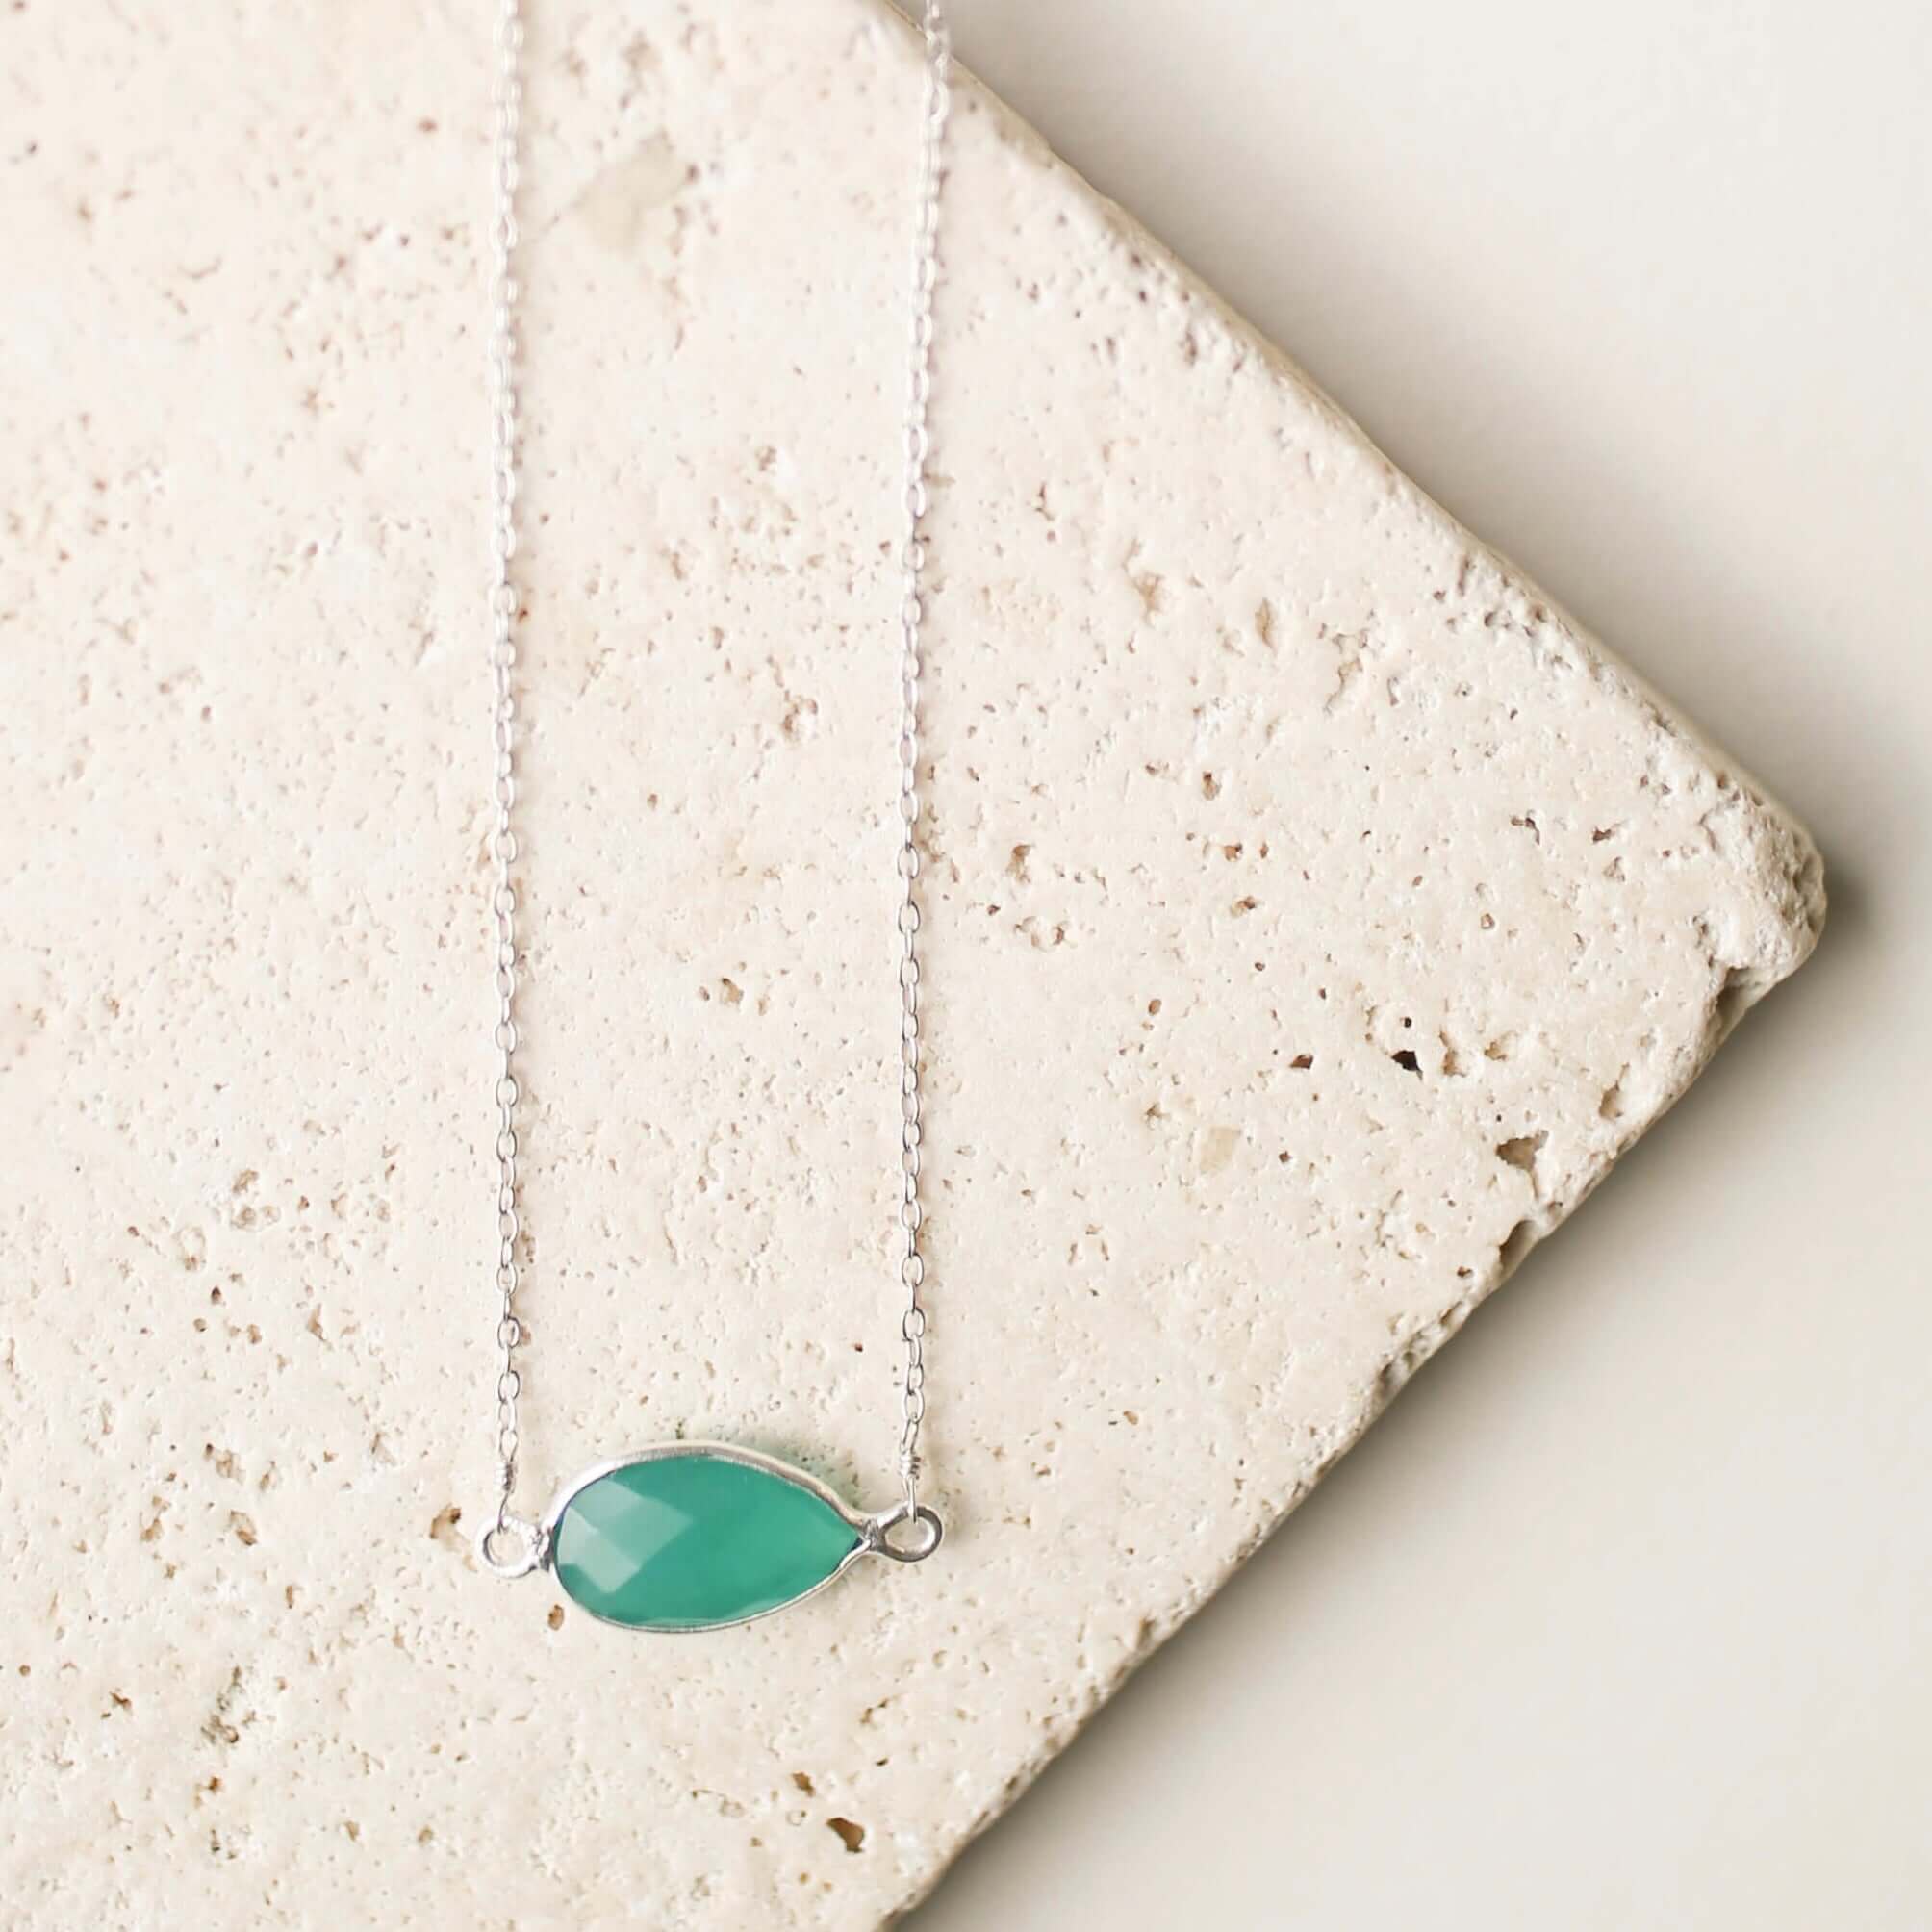 Minimalist Silver Necklace Featuring a Green Apatite Stone